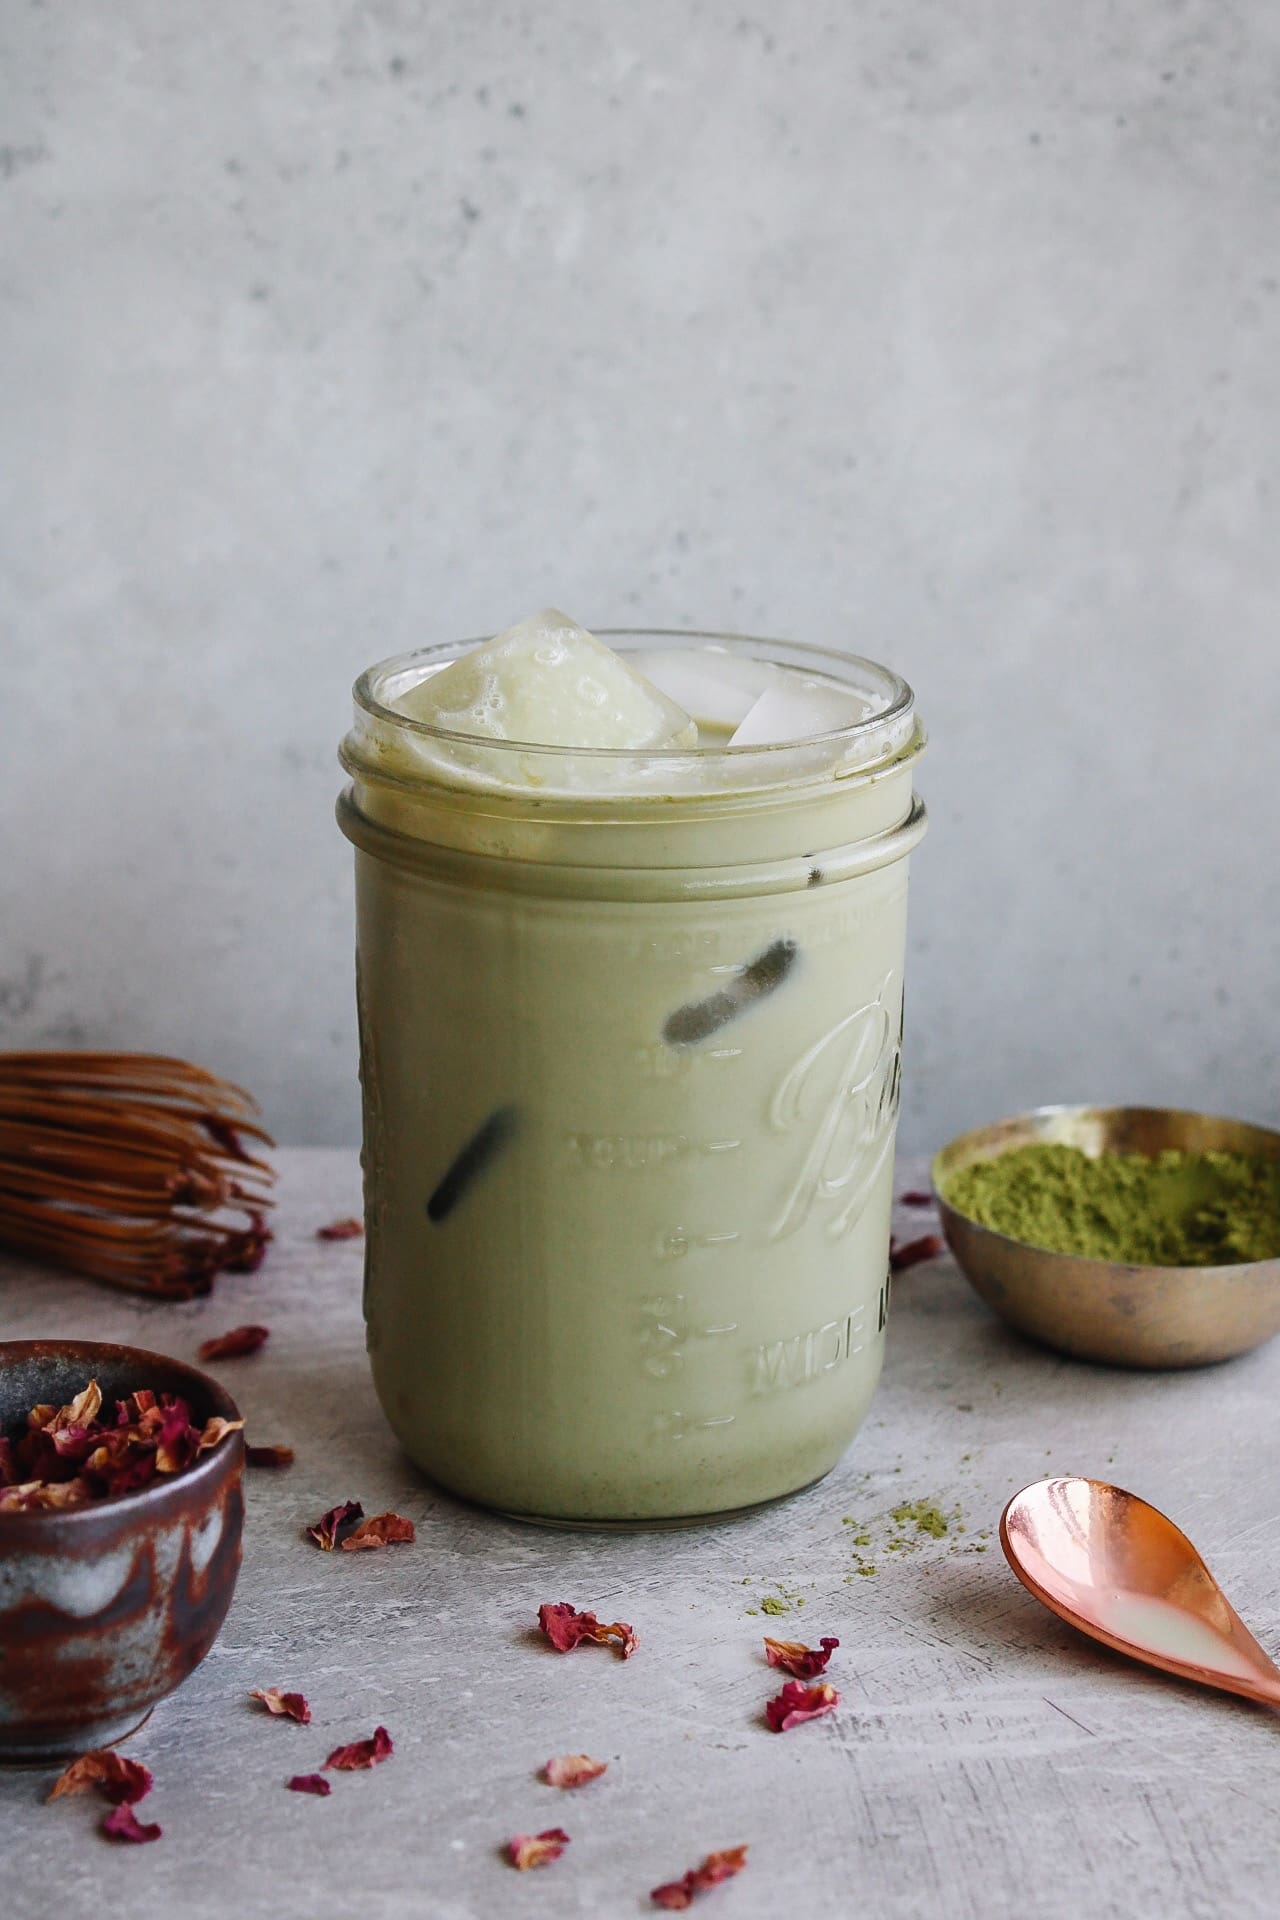 rose matcha latte in a glass jar surrounded by rose petals